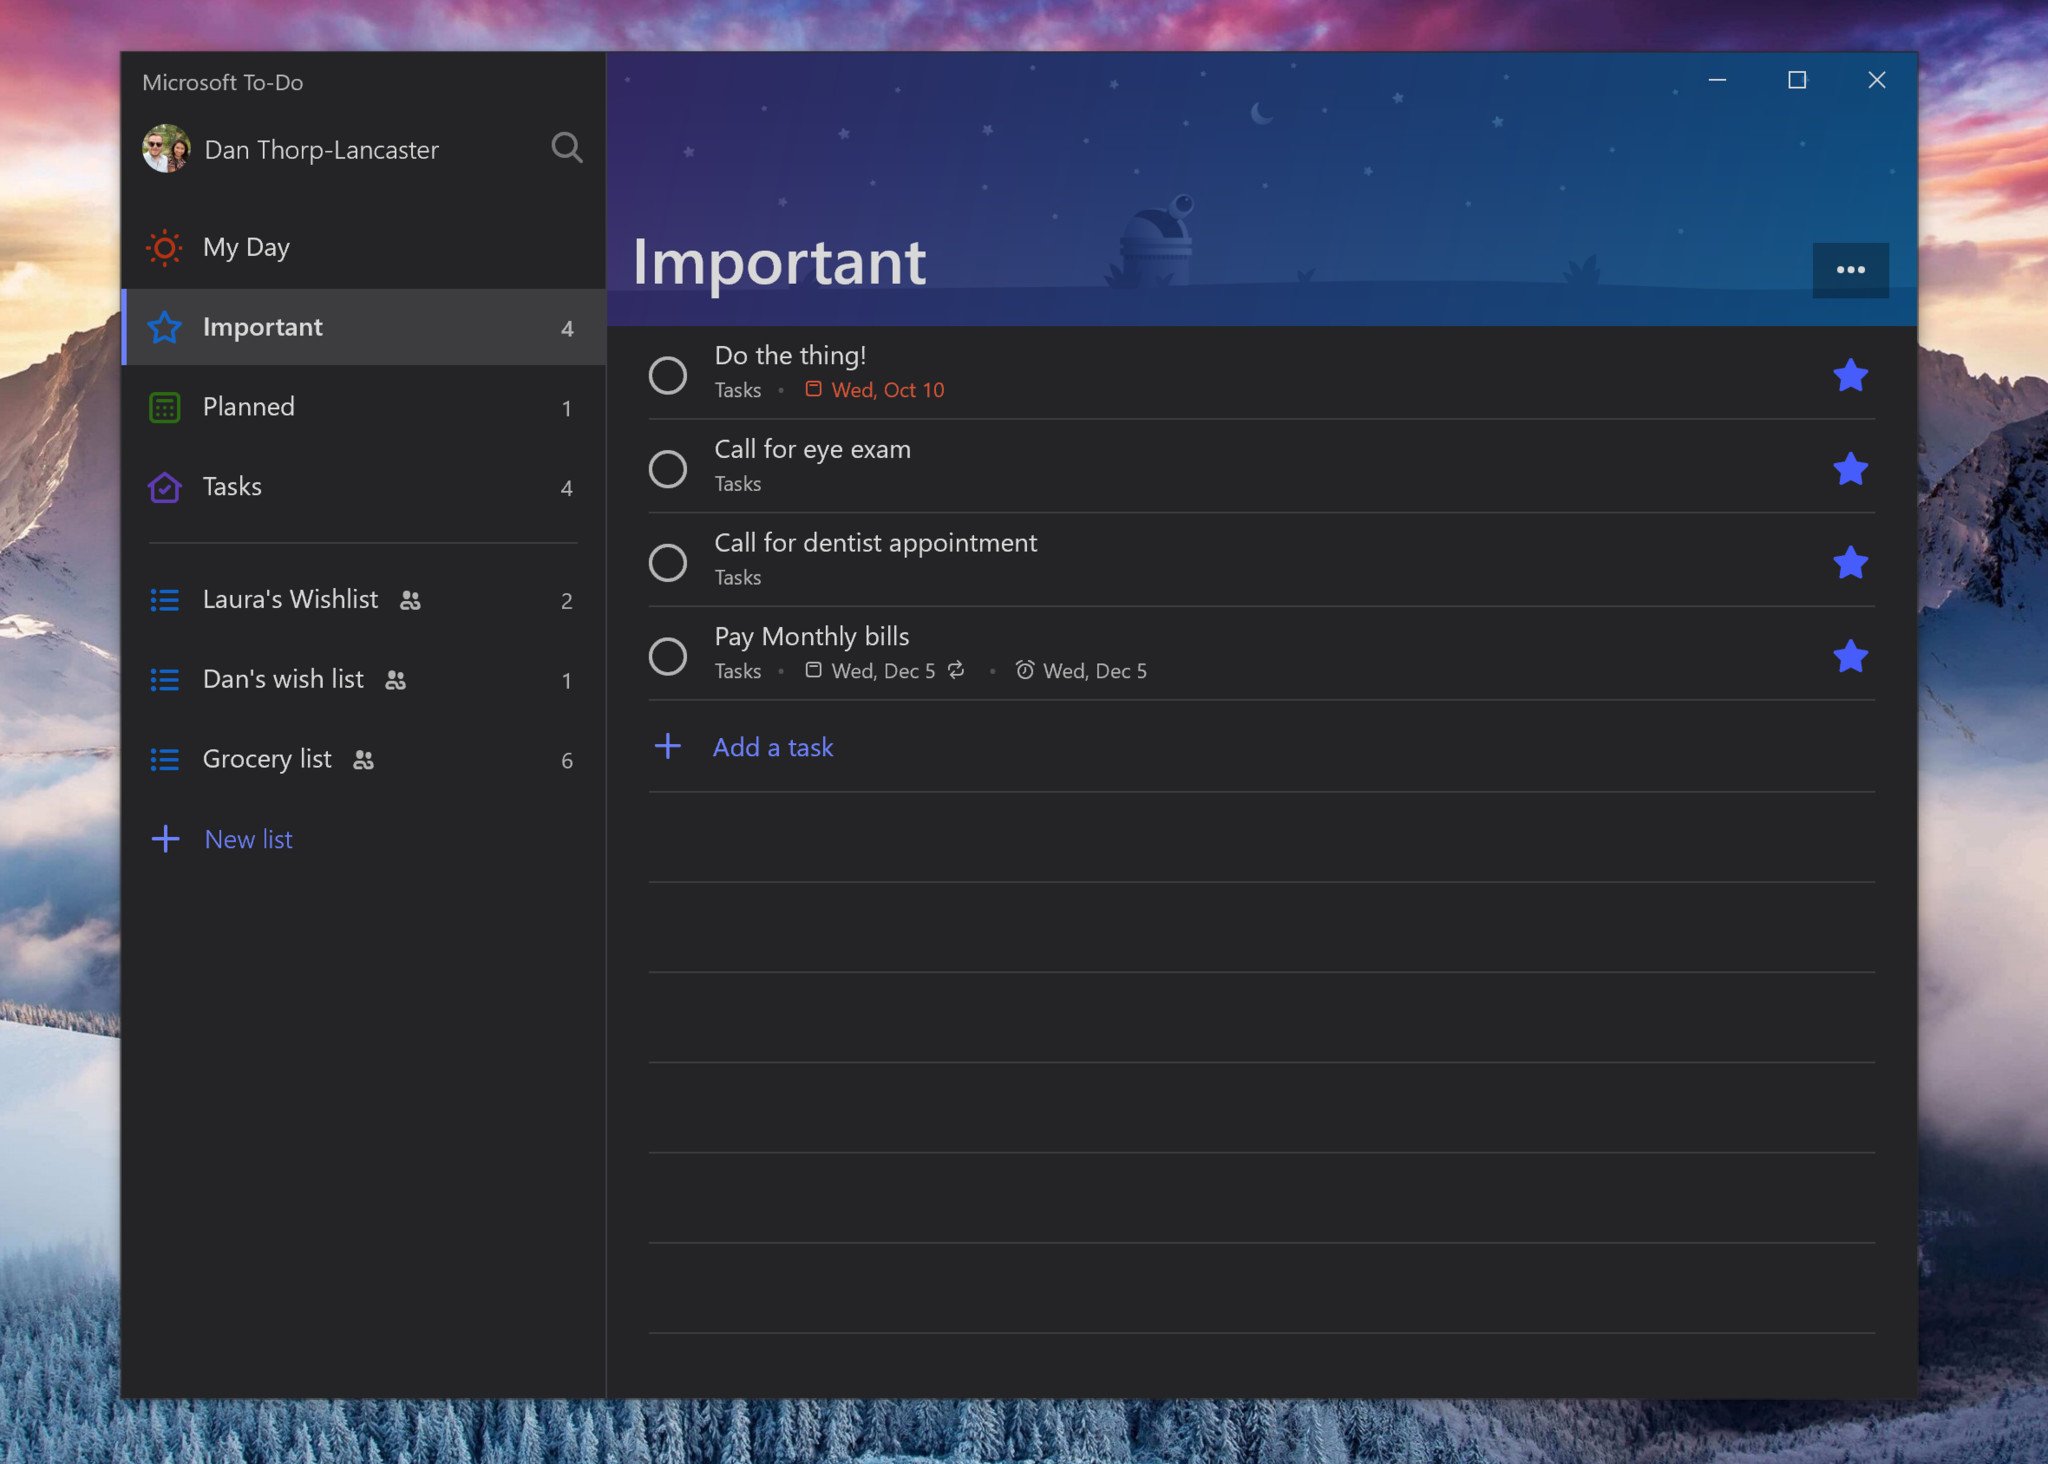 Microsoft To-Do for Windows 10 picks up new sorting options for smart lists